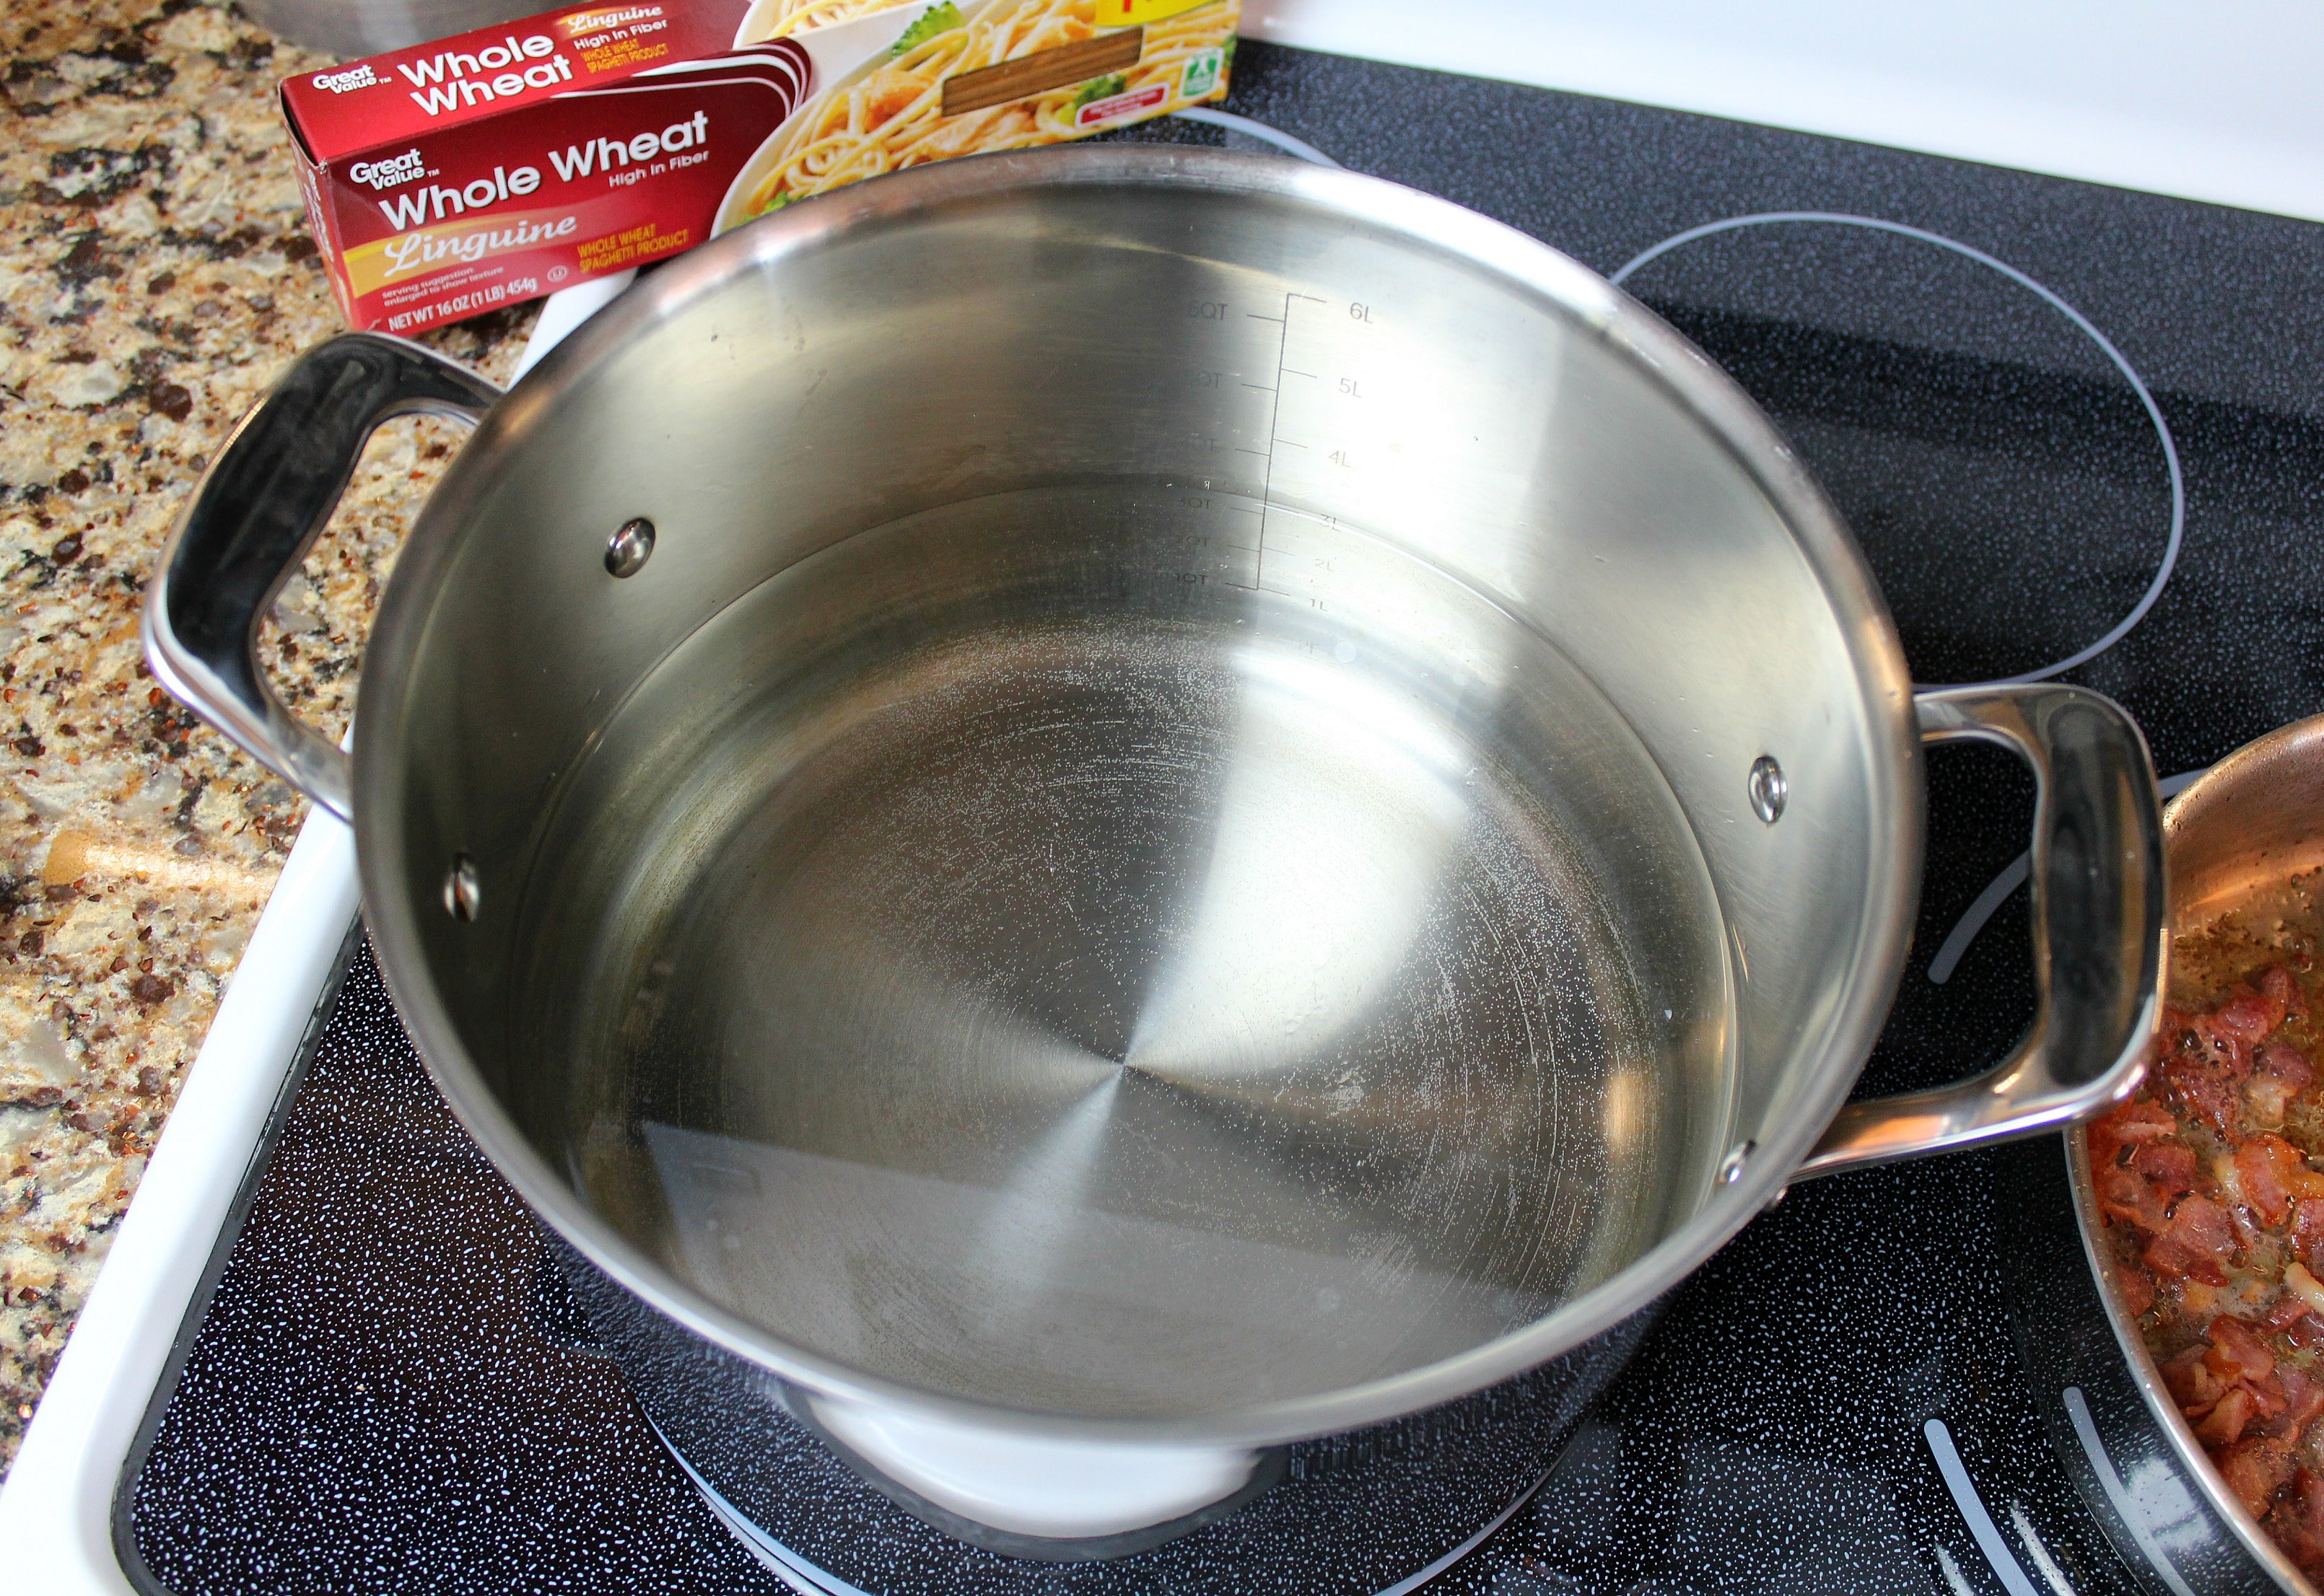 Boil a large pot of water for the pasta